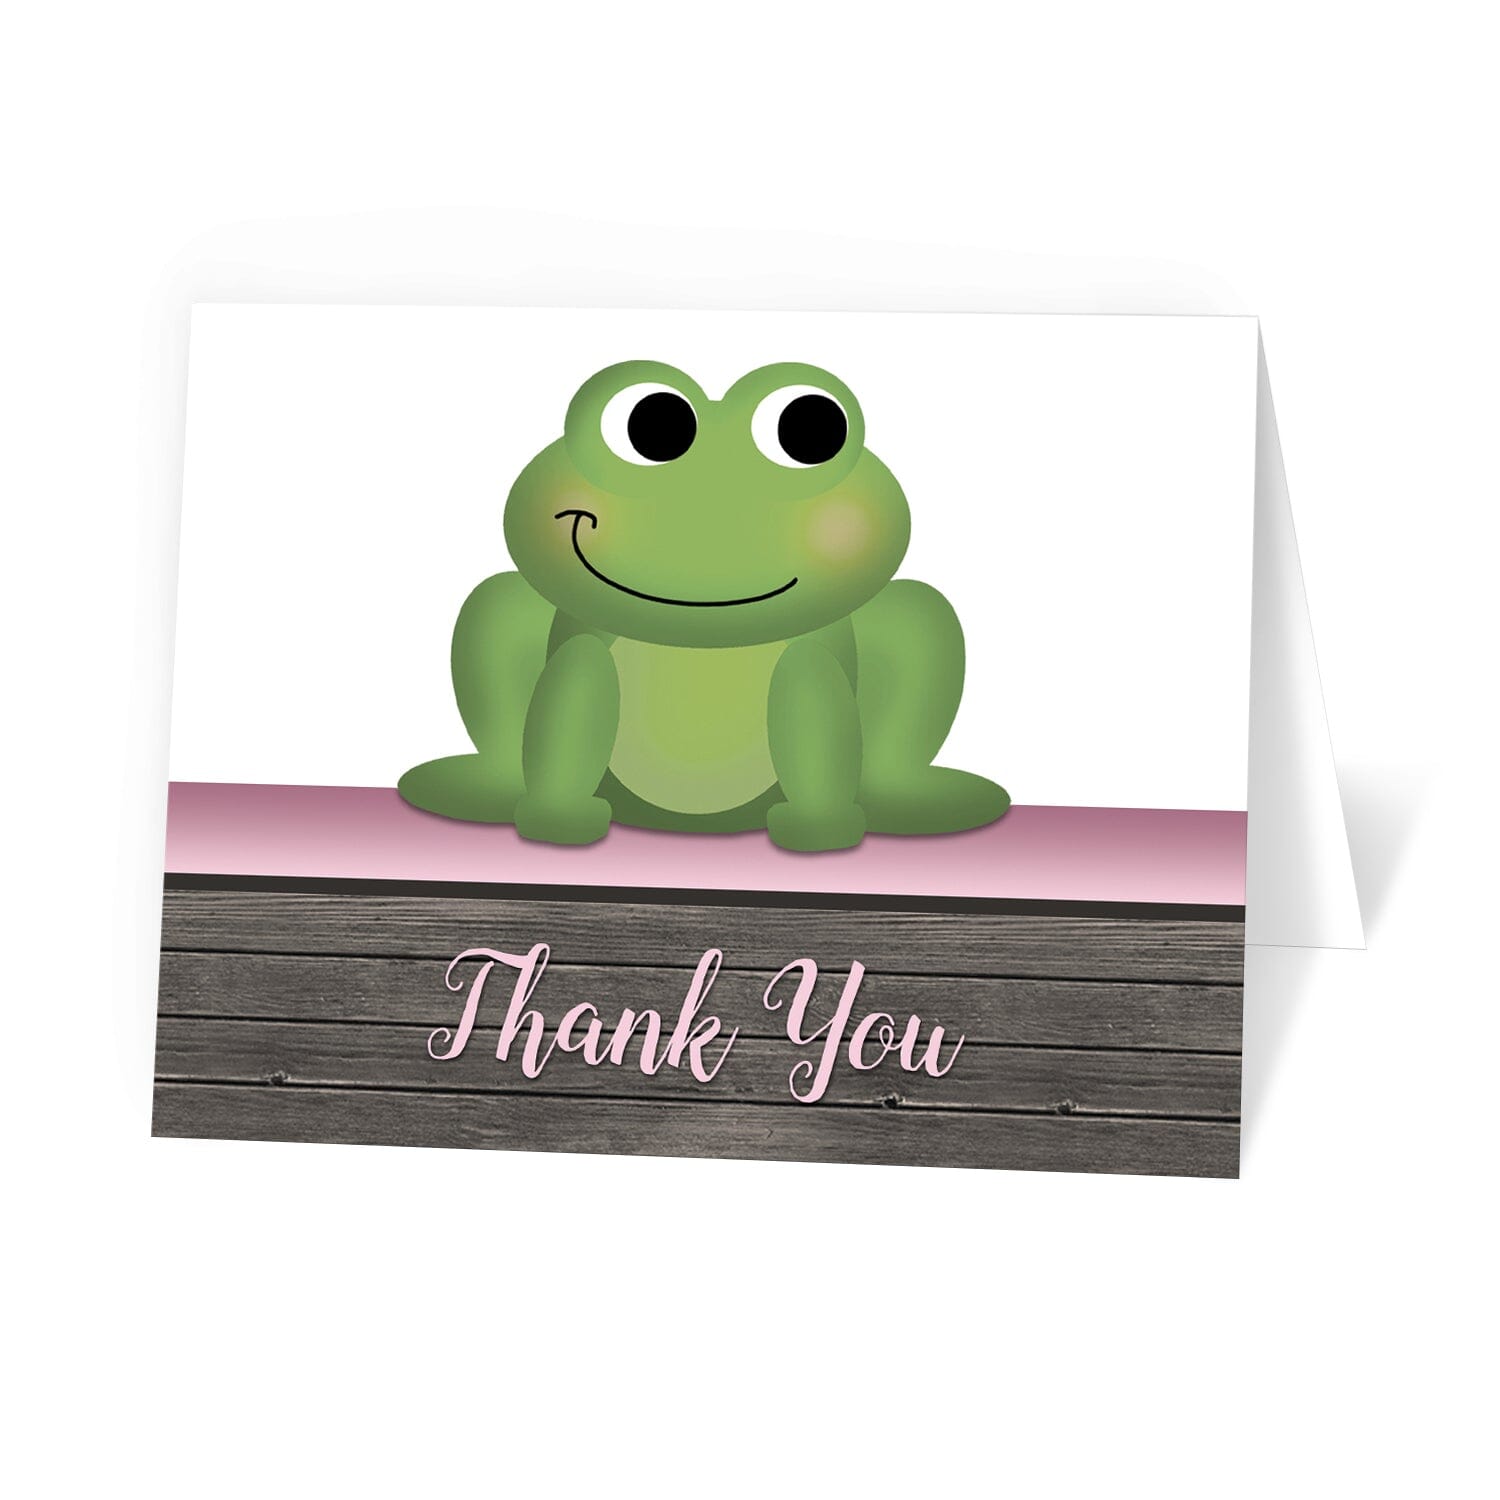 Cute Frog Green Pink Rustic Wood Thank You Cards at Artistically Invited.